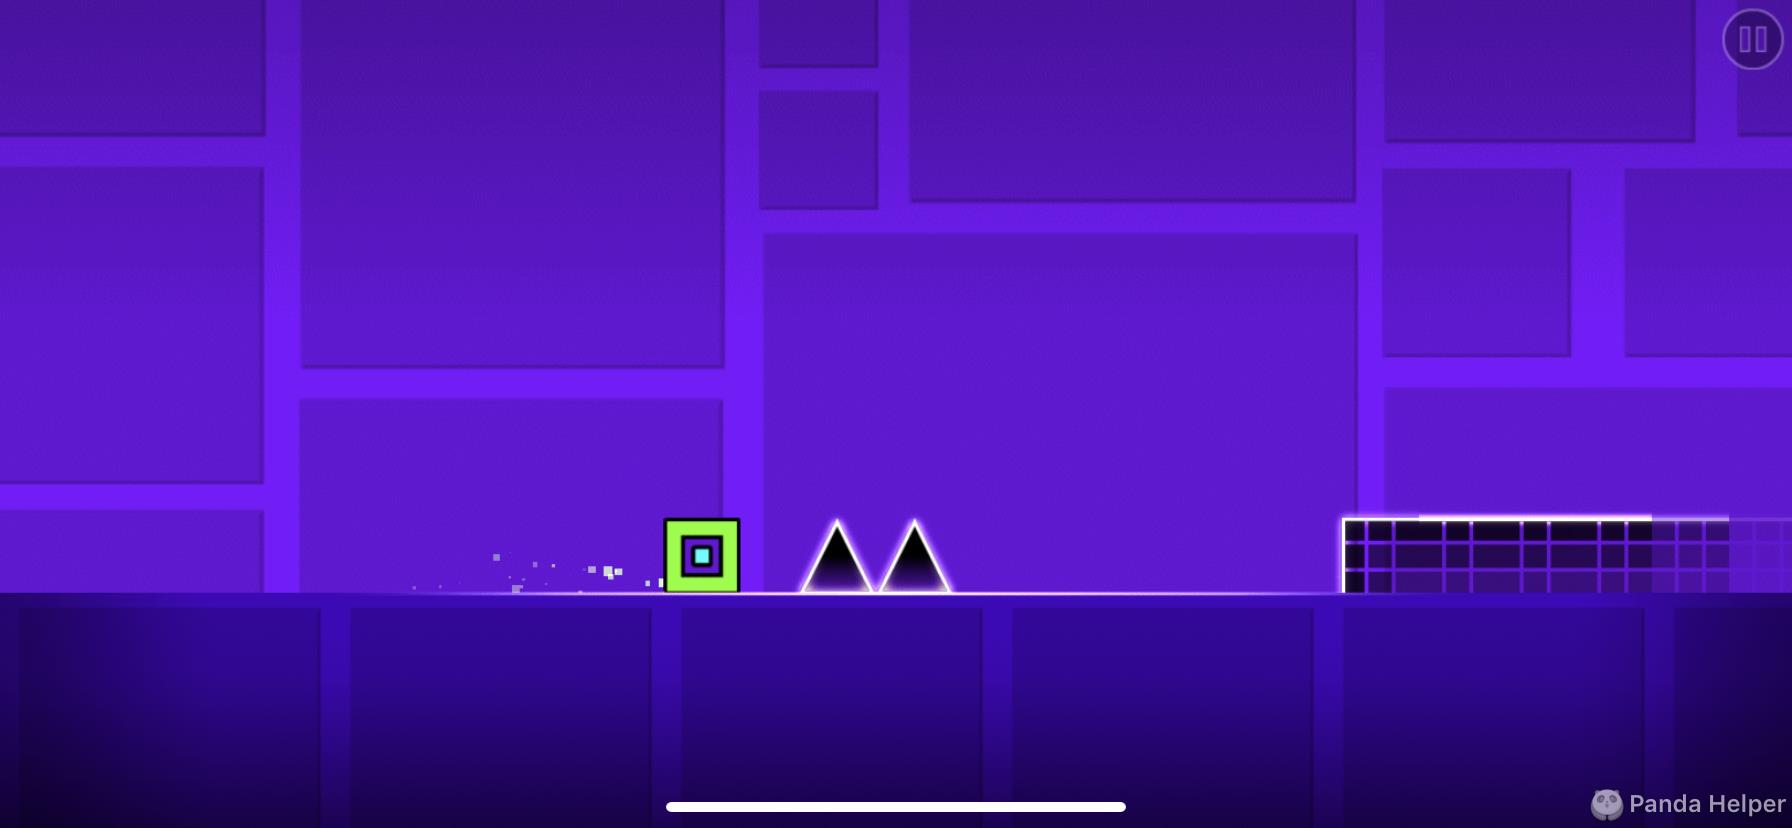 Geometry Dash features